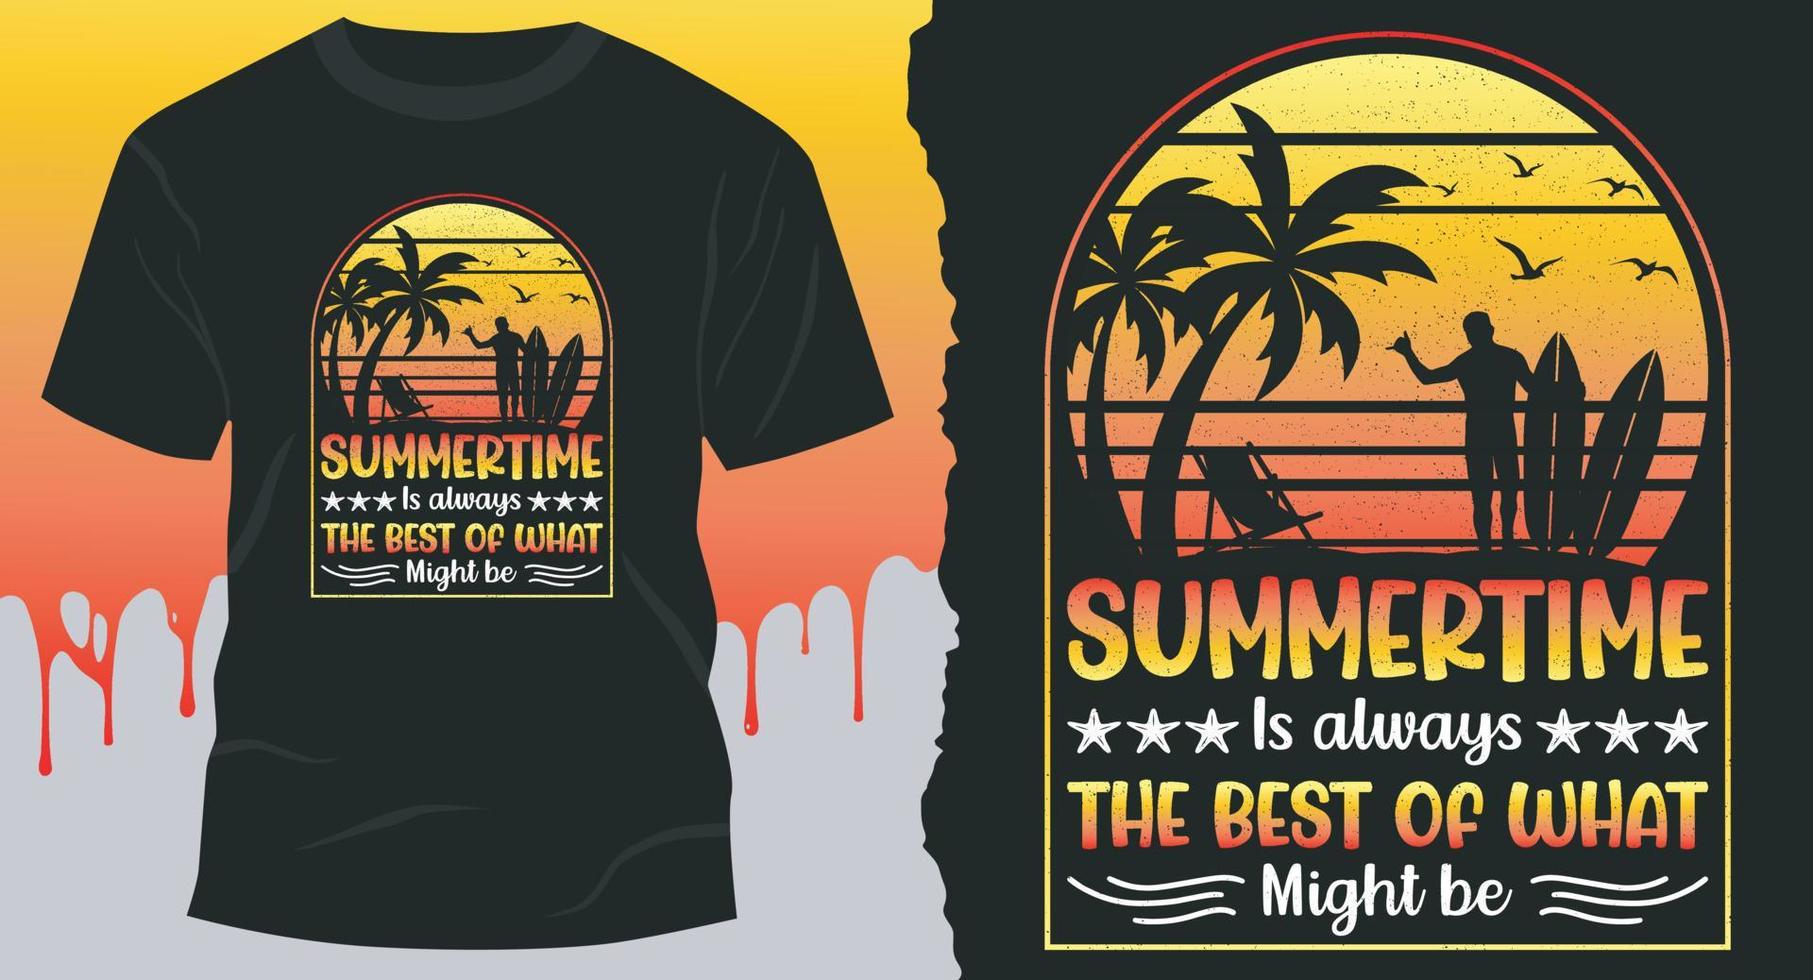 Summertime is always the best of what might be. T-shirt idea for summer vacation vector